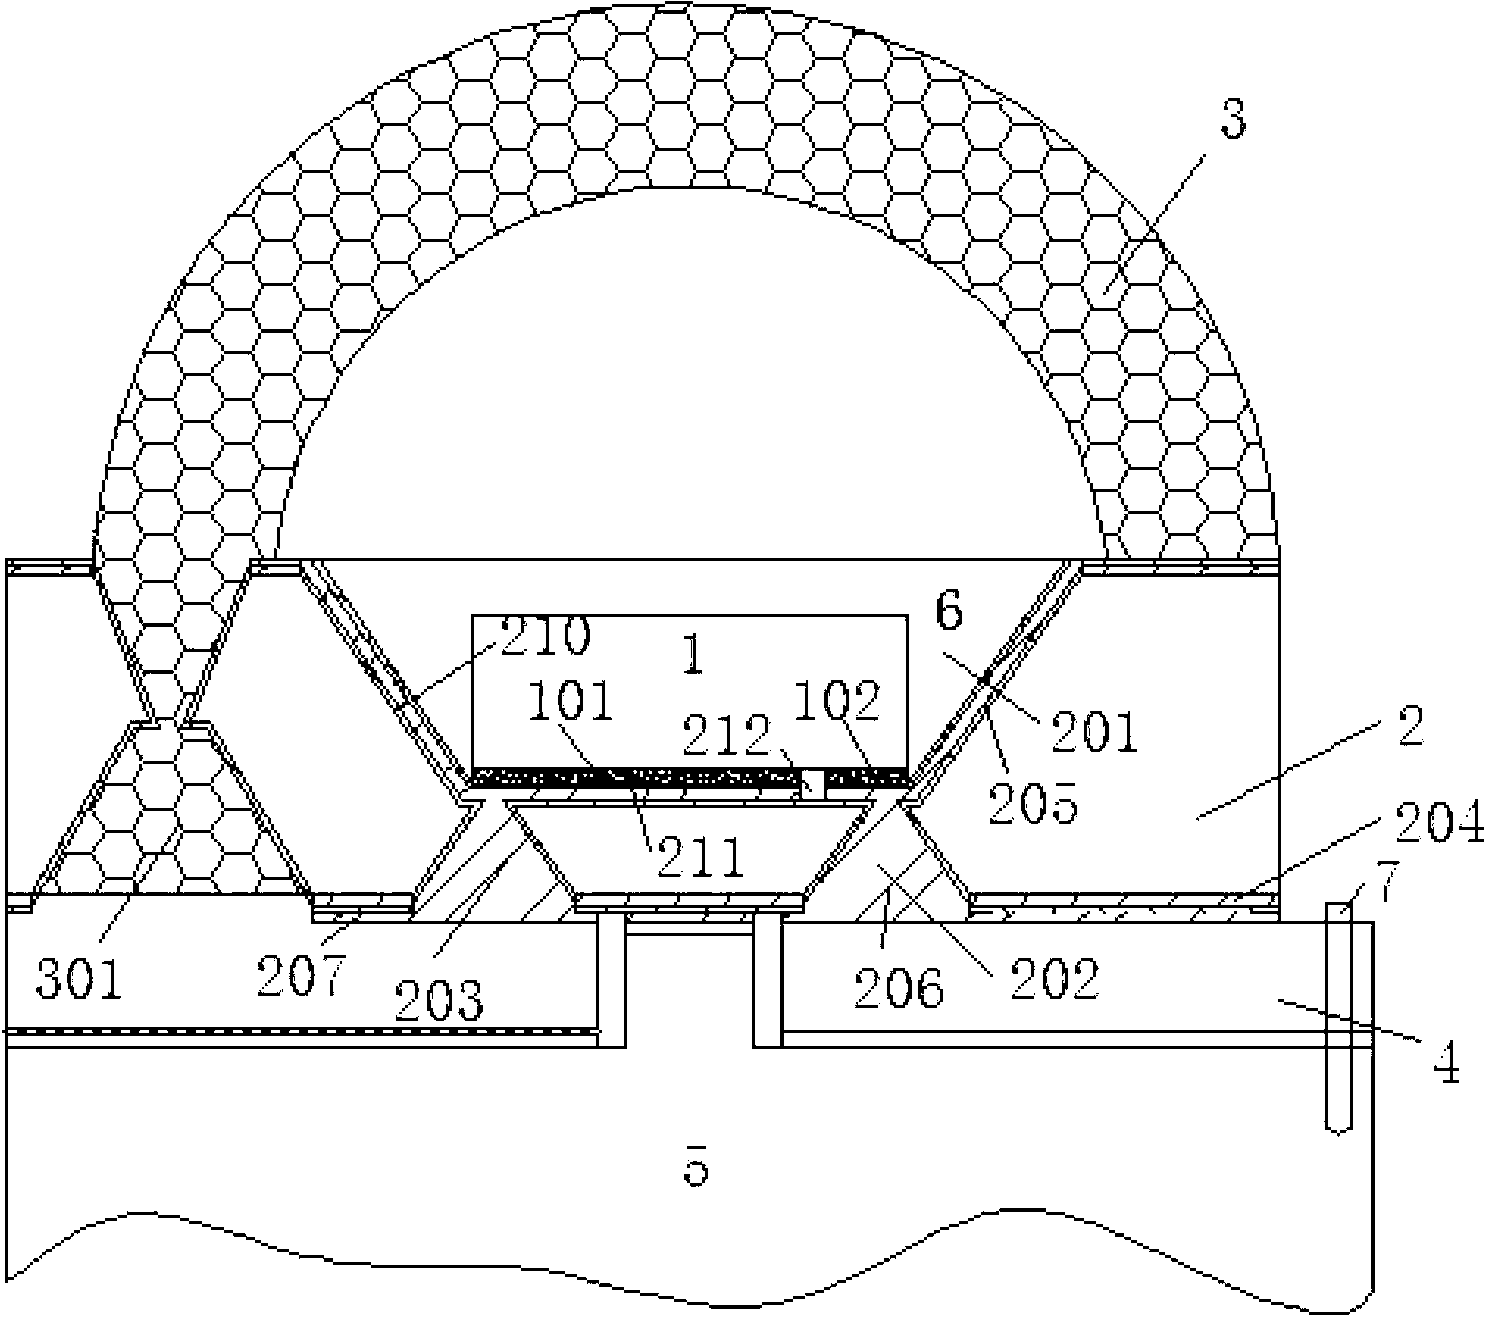 Wafer level packaging structure, method and product for LED flip chip